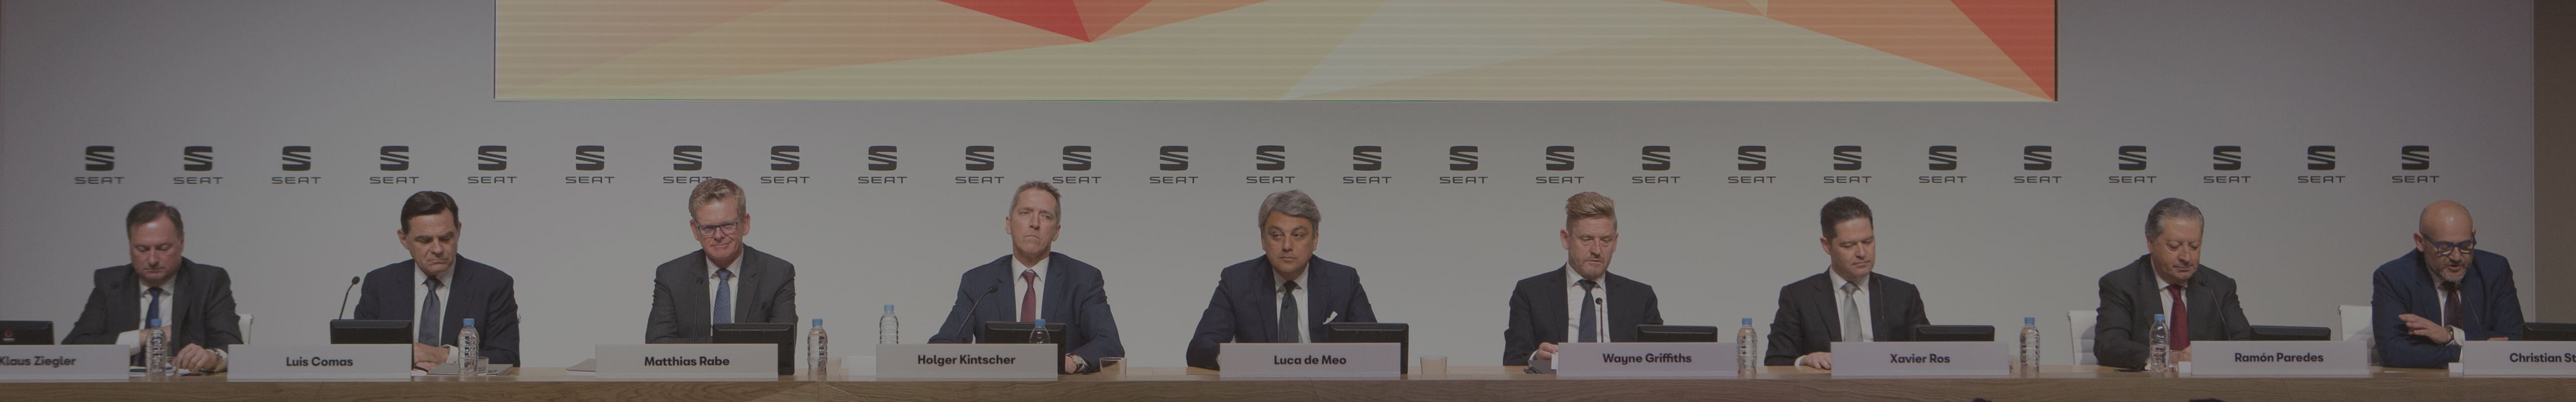 Une année record pour SEAT - SEAT commitee of Directors. President and CEO Luca de Meo at SEAT Annual media conference 2018